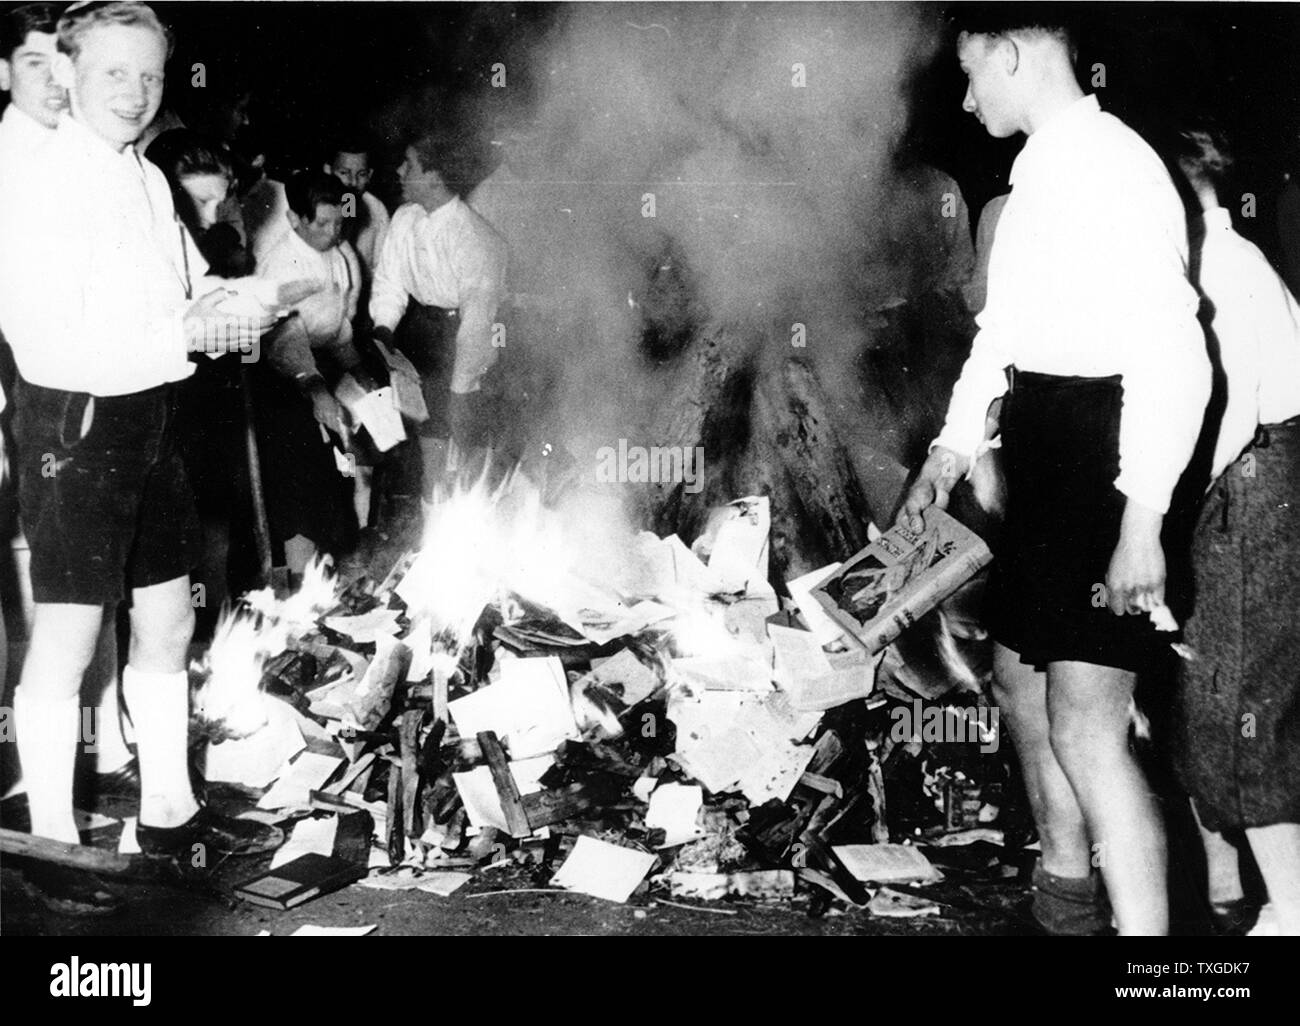 Photograph of Hitler Youth members burning books. Dated 1938 Stock Photo